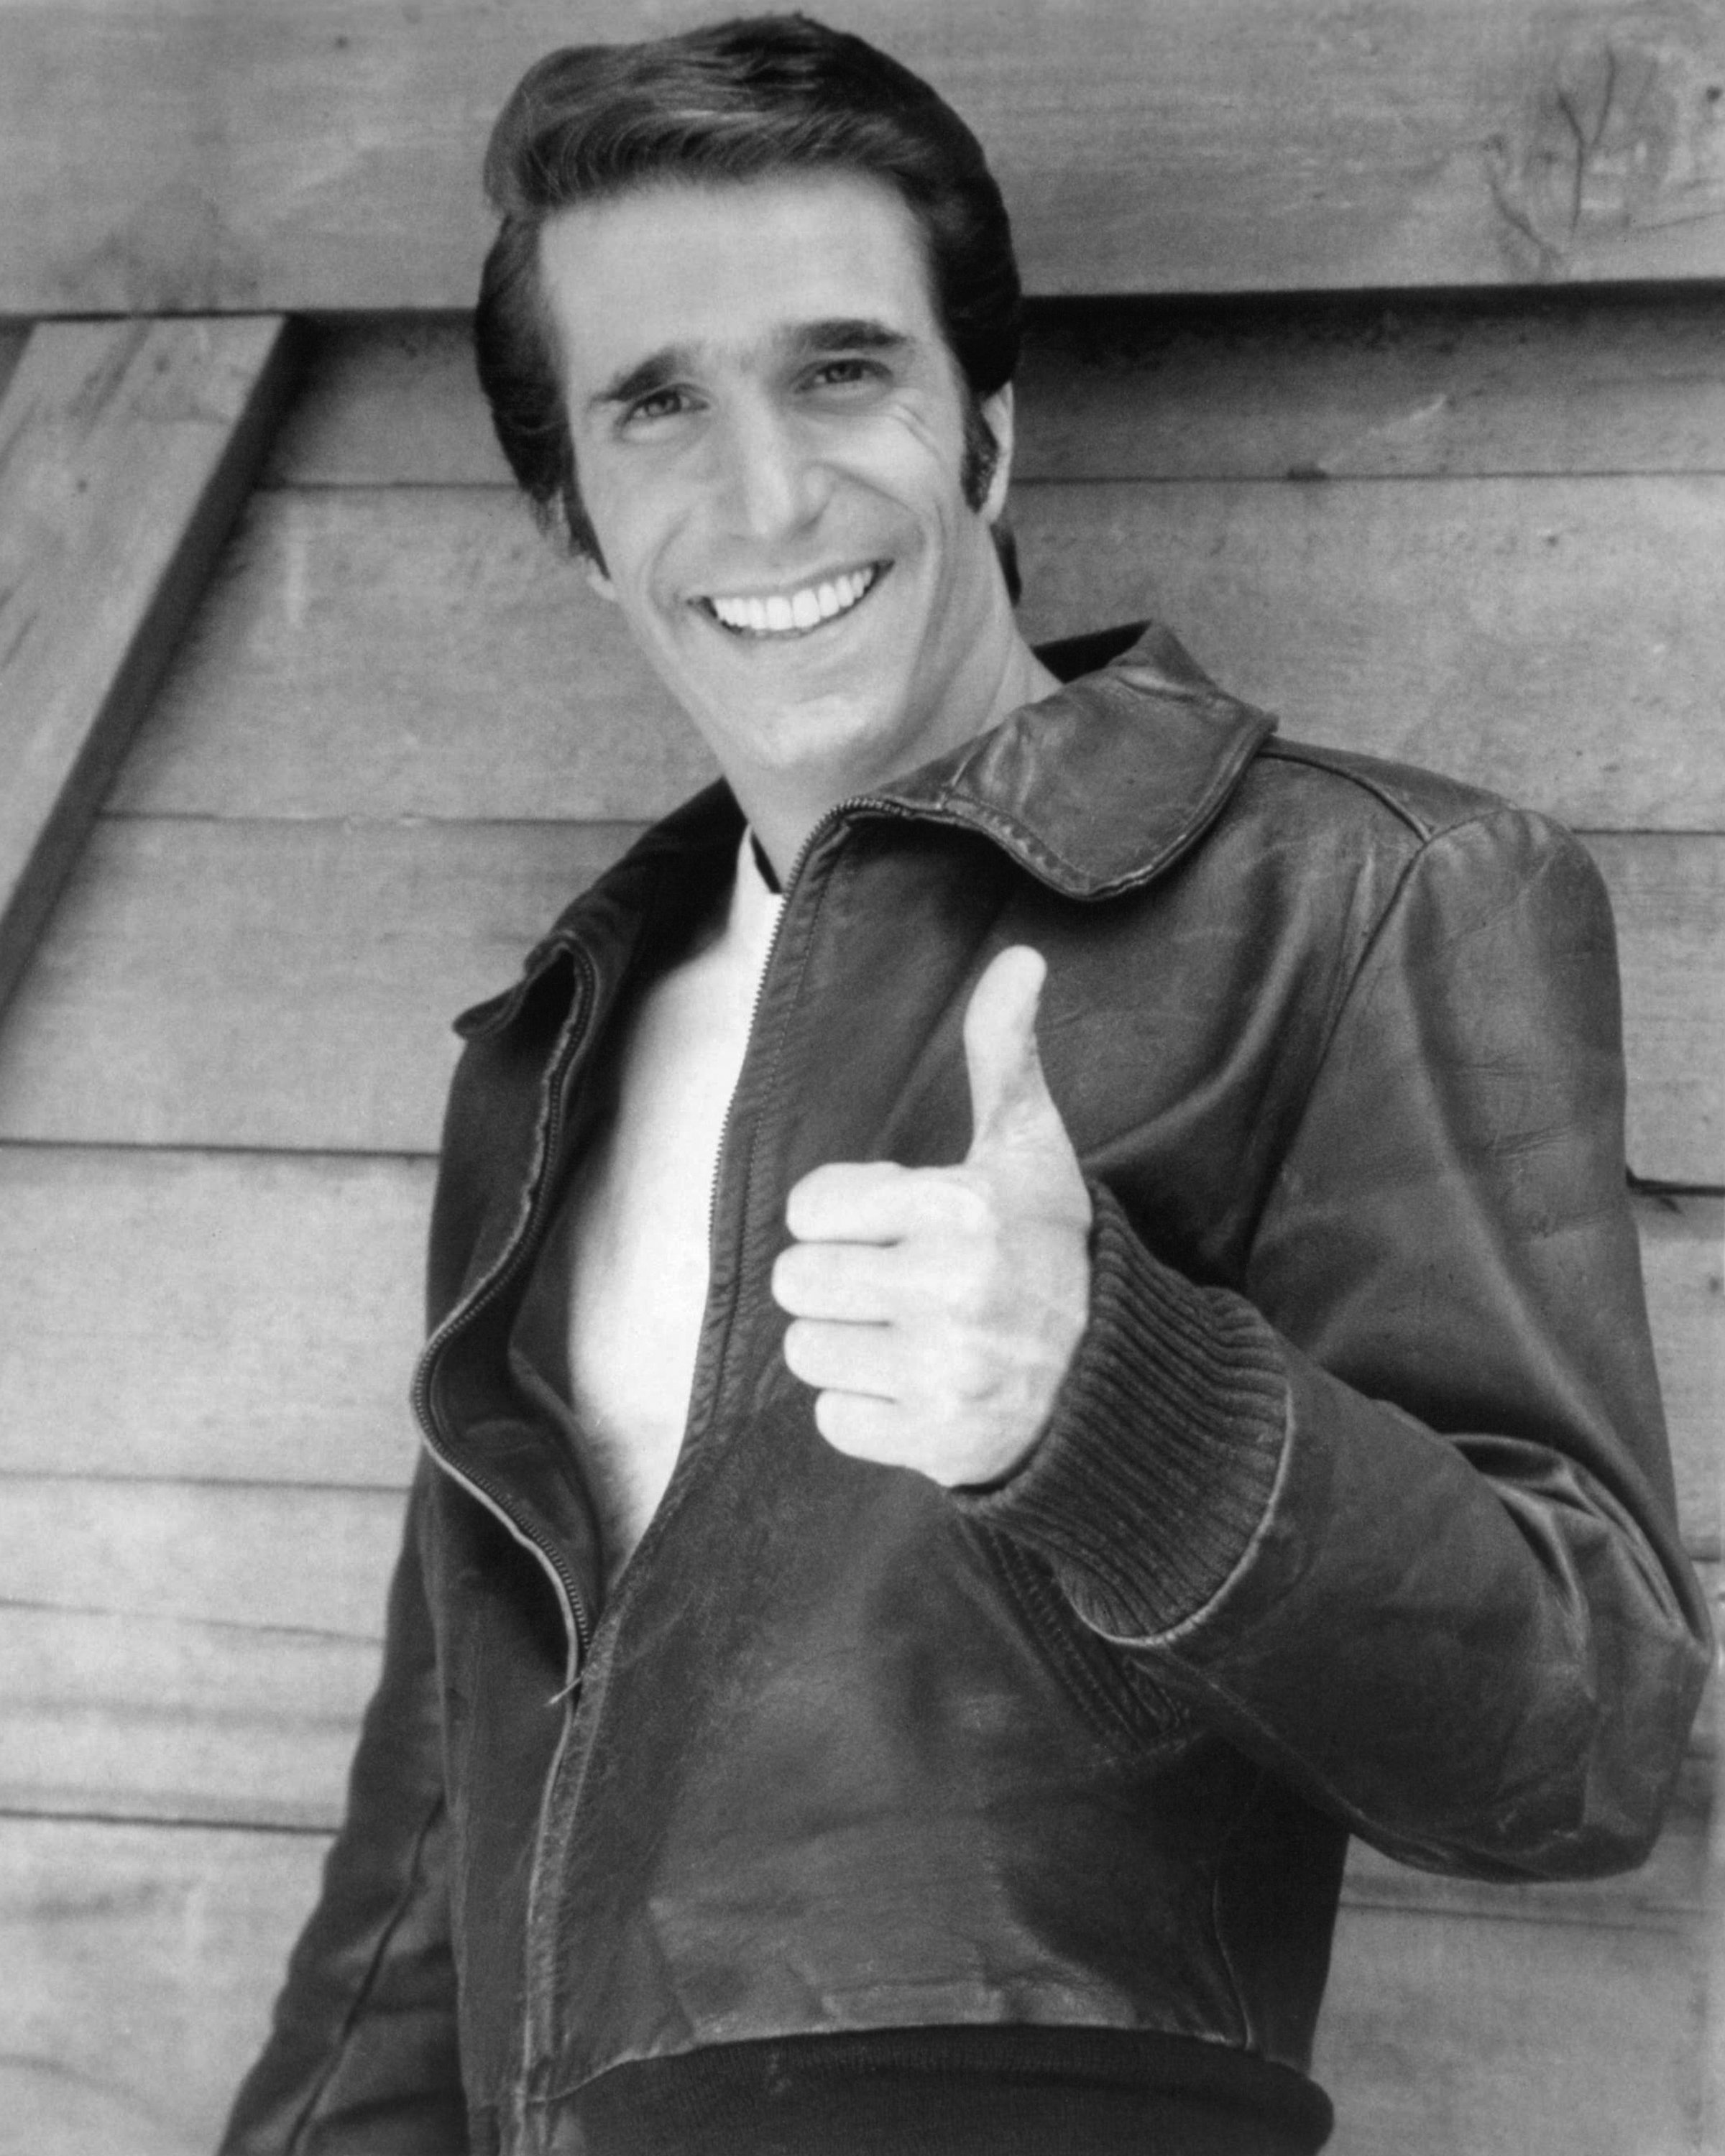 Executive producer Henry Winkler as Fonzie in the American TV show "Happy Days" in 1978. | Source: Getty Images